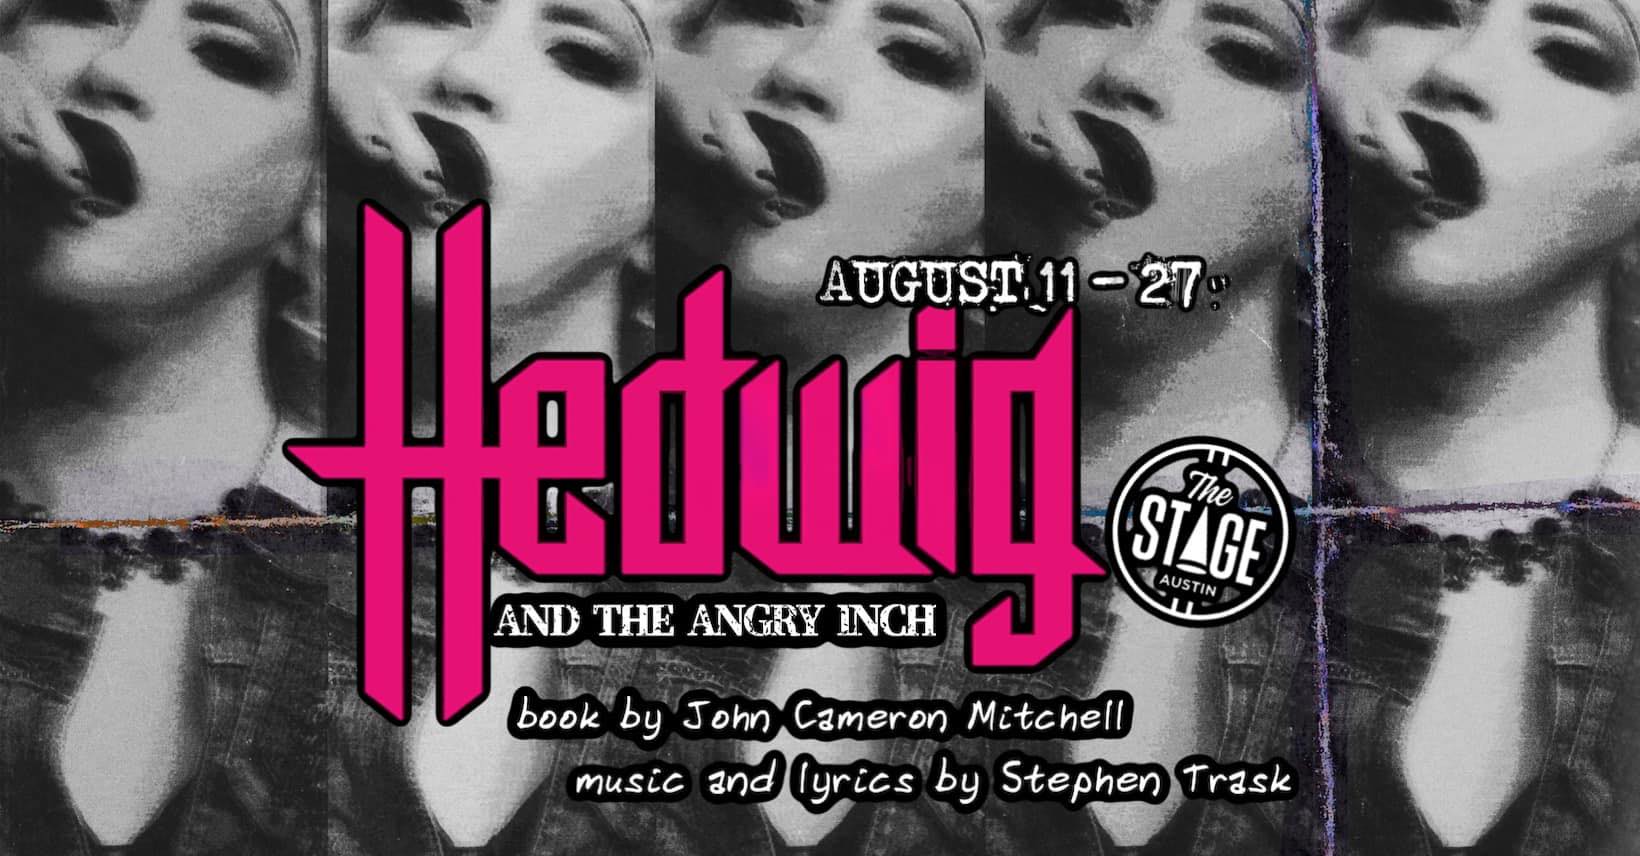 Hedwig and the Angry Inch by The Stage